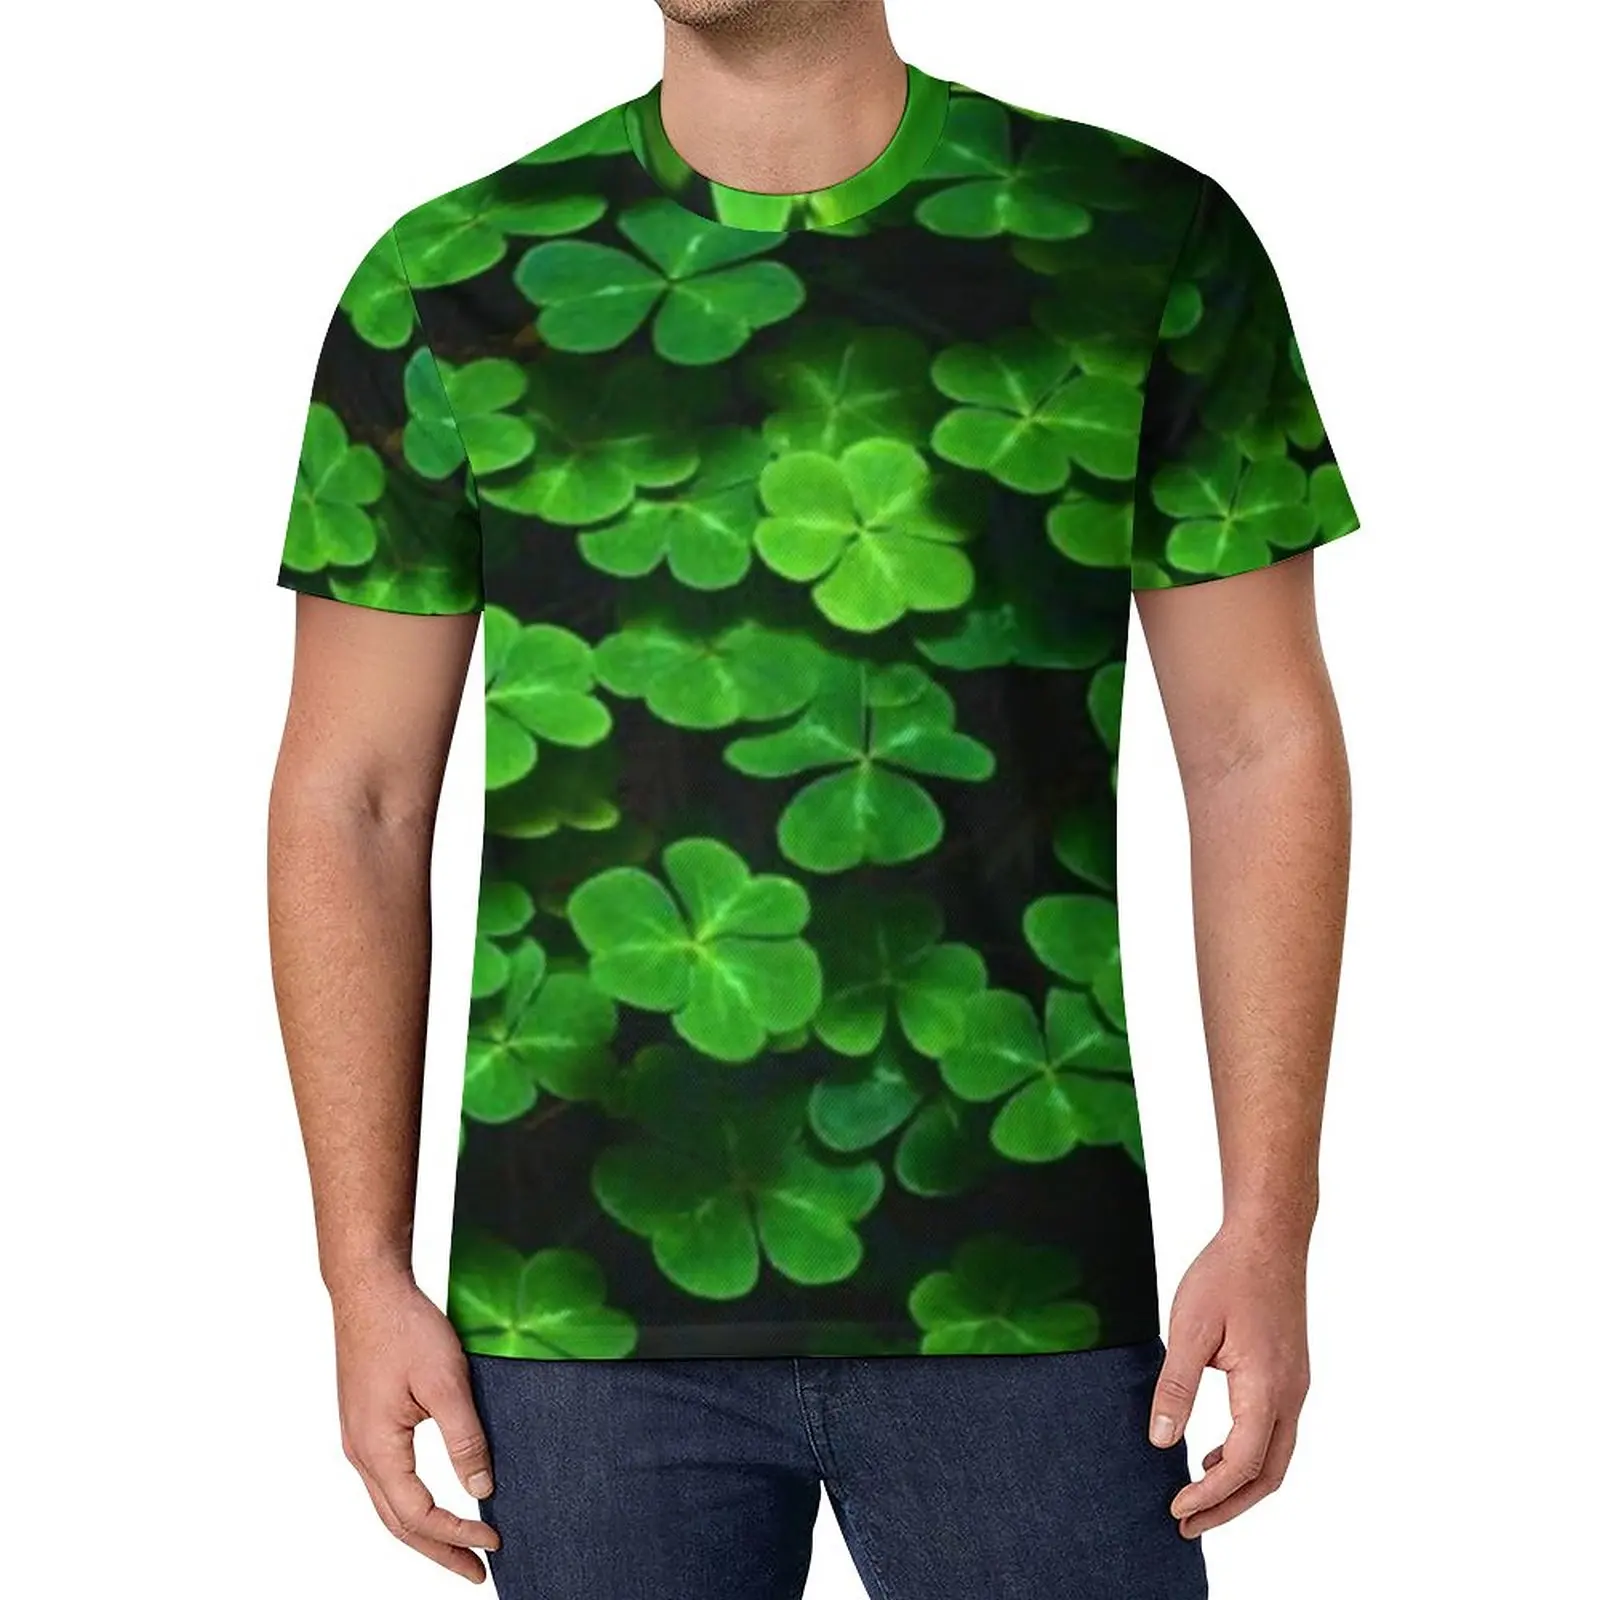 

St Patrick's Day T Shirt Happy Paddys Day Shamrocks Hip Hop T Shirts Beach Graphic Tees Awesome Tops Plus Size 6XL